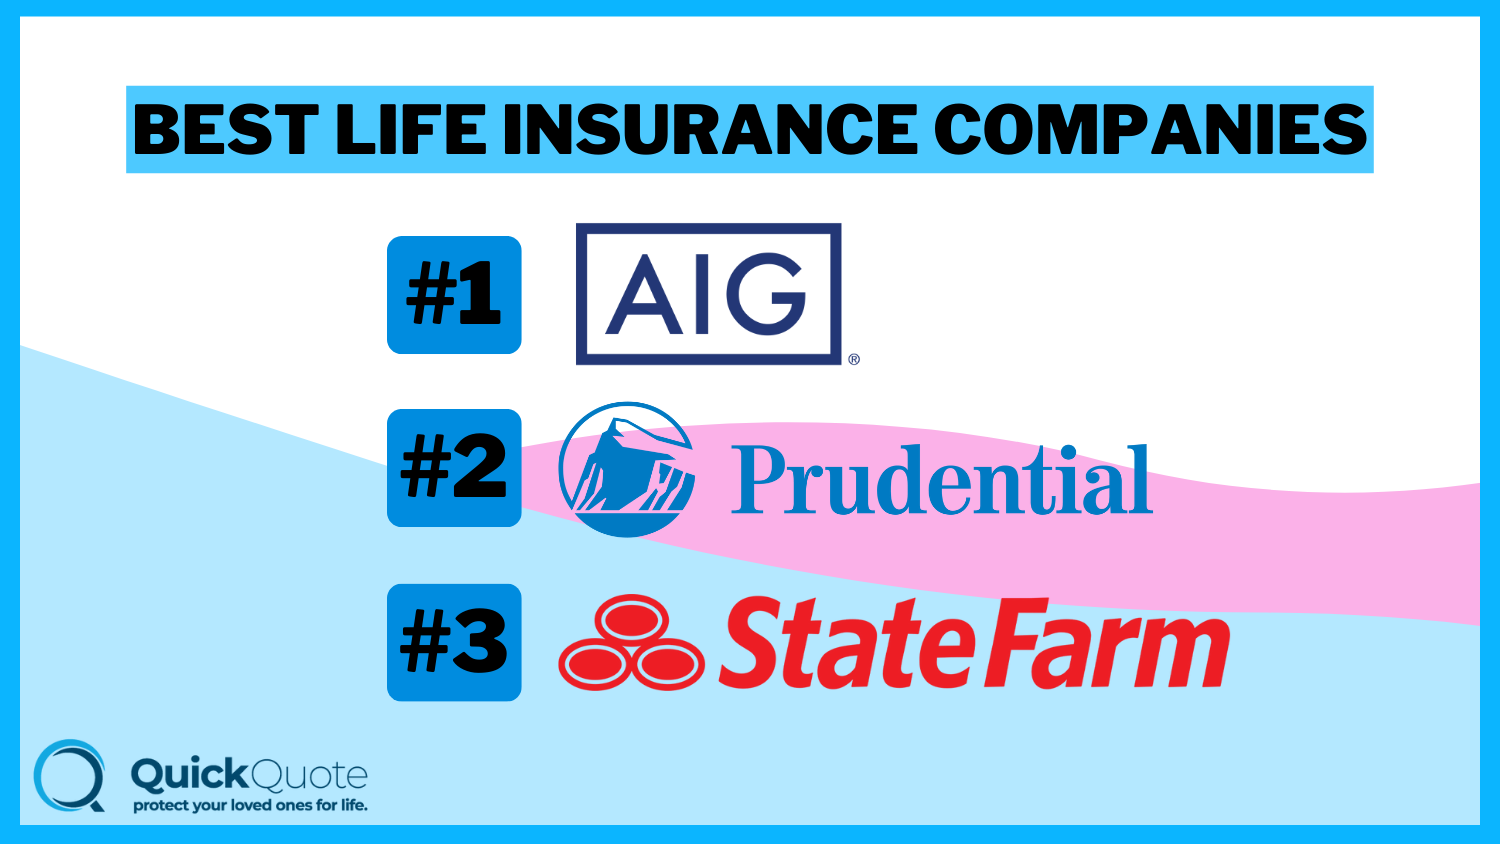 Best Life Insurance Companies: AIG, Prudential, and State Farm.